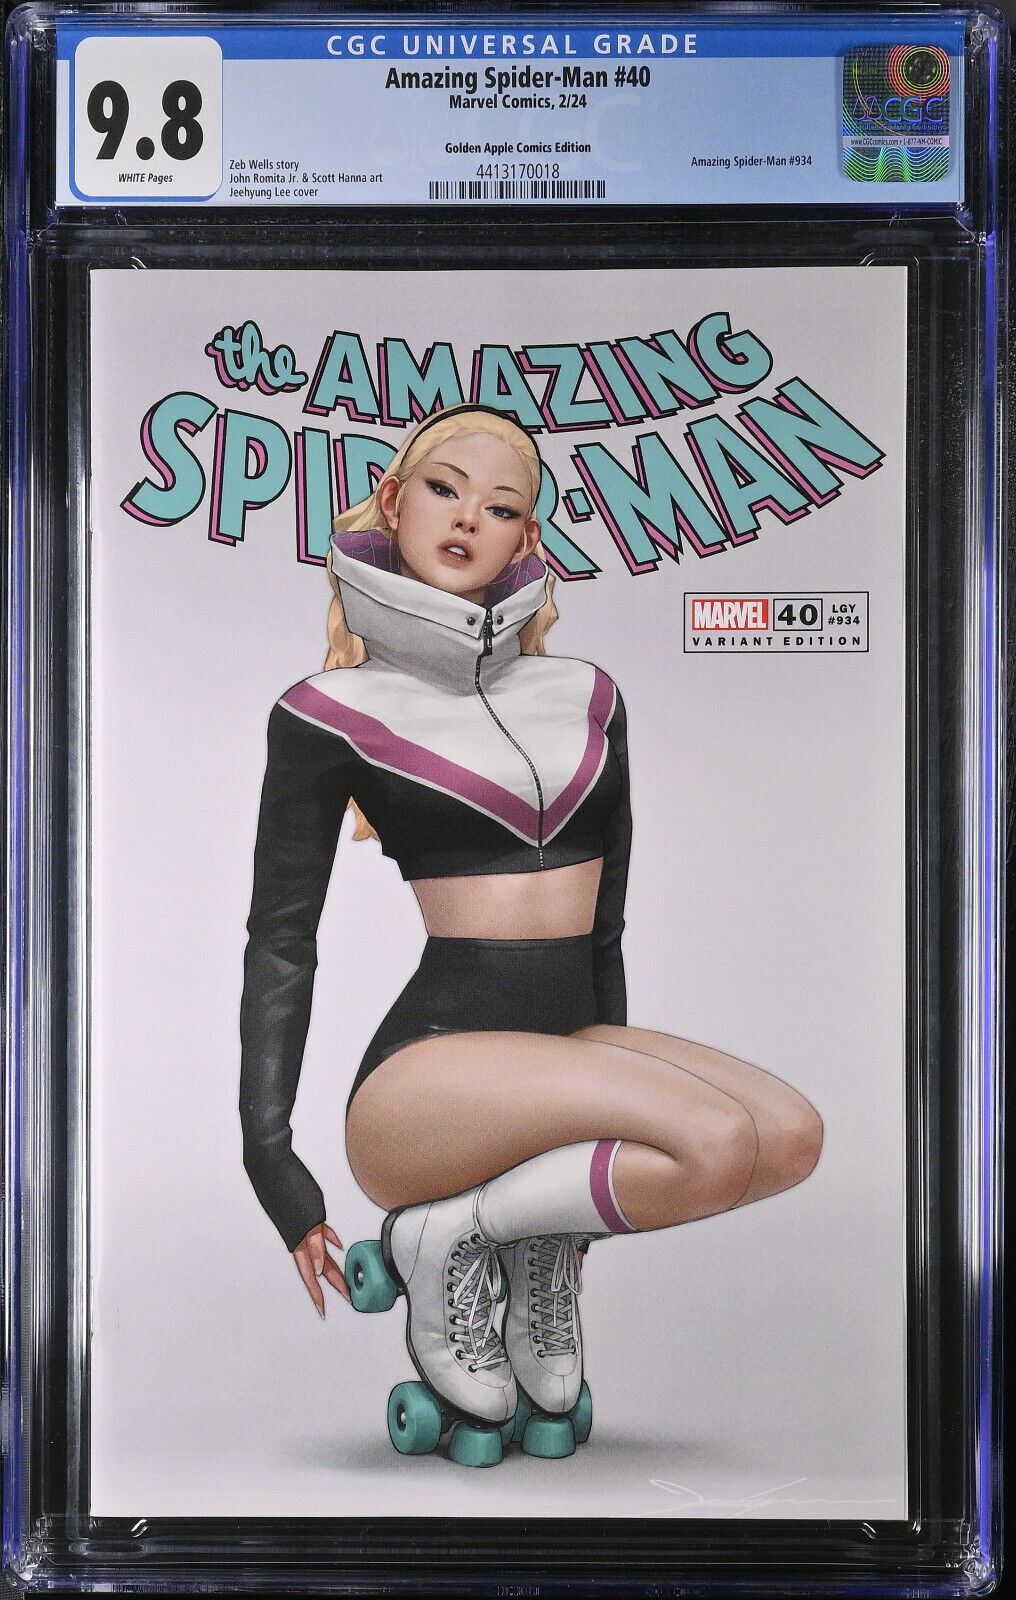 Amazing Spider-Man #40 Jeehyung Lee Trade Variant CGC 9.8